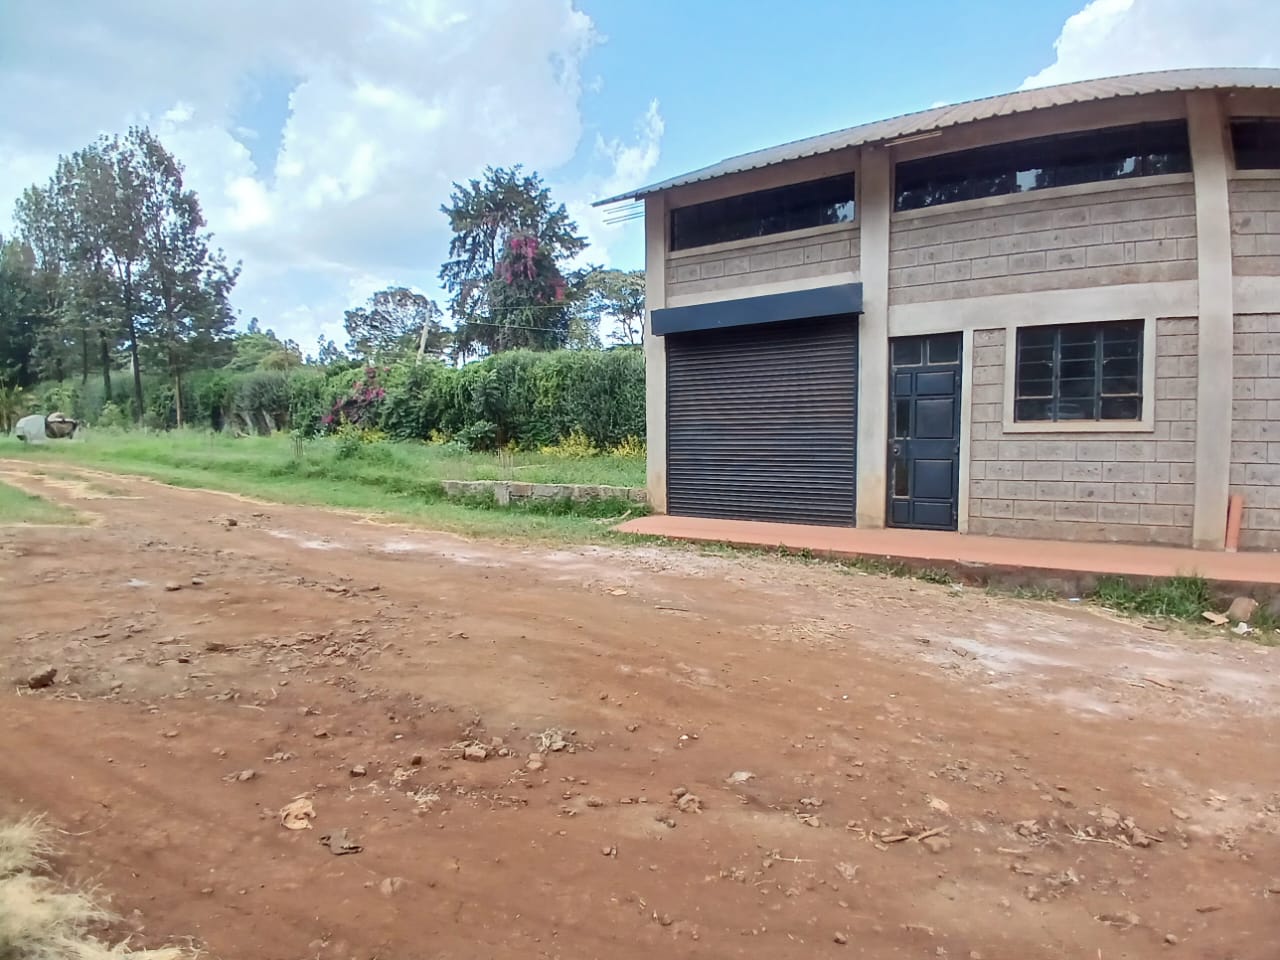 Spacious Commercial Property to Let in Kikuyu. Floor Size 1506 Sq FT. Asking Price: 120k Plus 2 Month Deposit and 1 Month Rent. Musilli Homes.